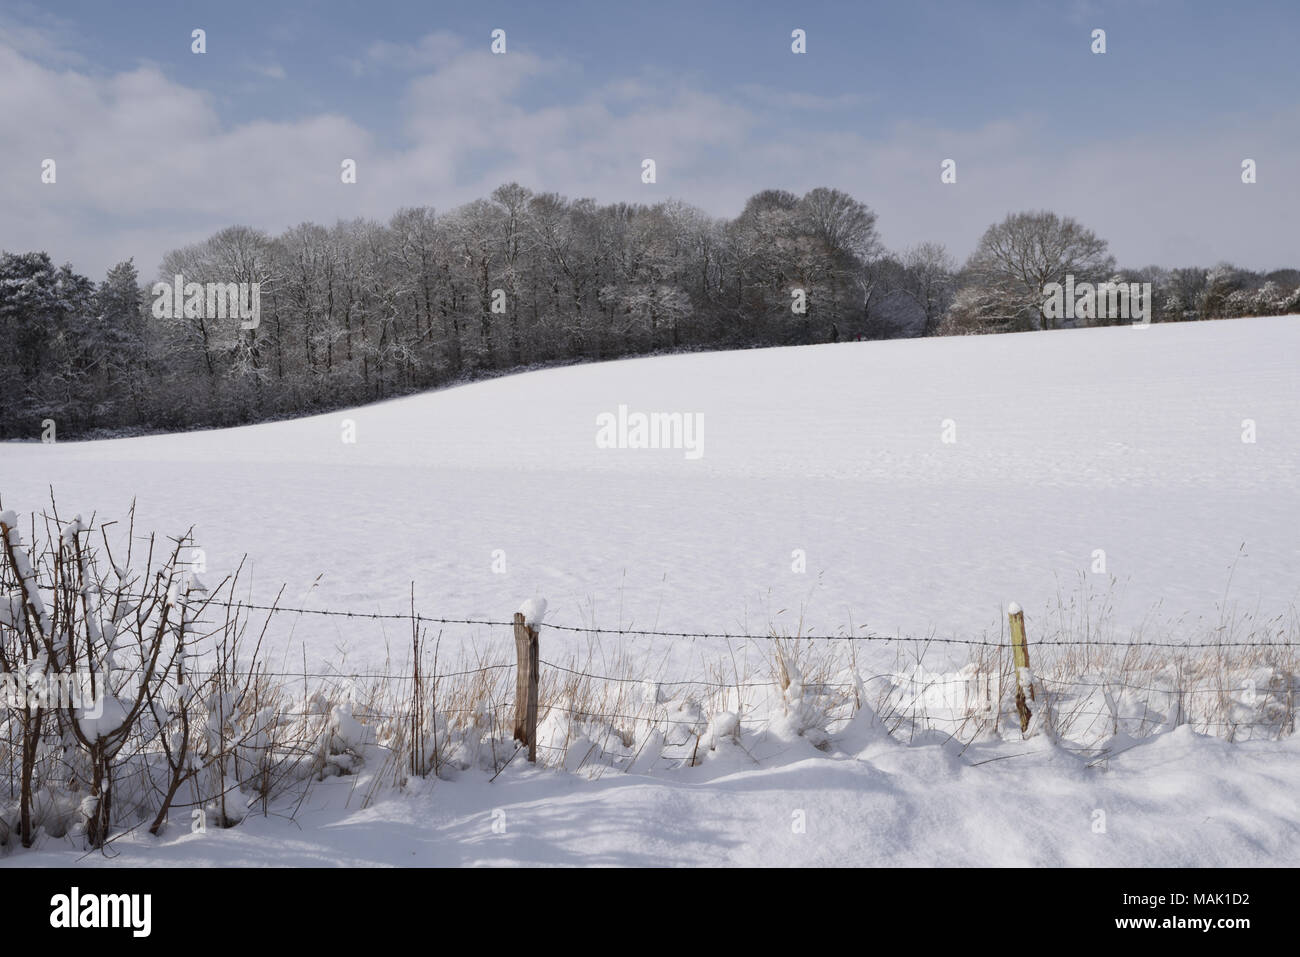 A snow covered field in March with a barbed wire fence. Bedgebury Forest, Kent, England. UK. Stock Photo